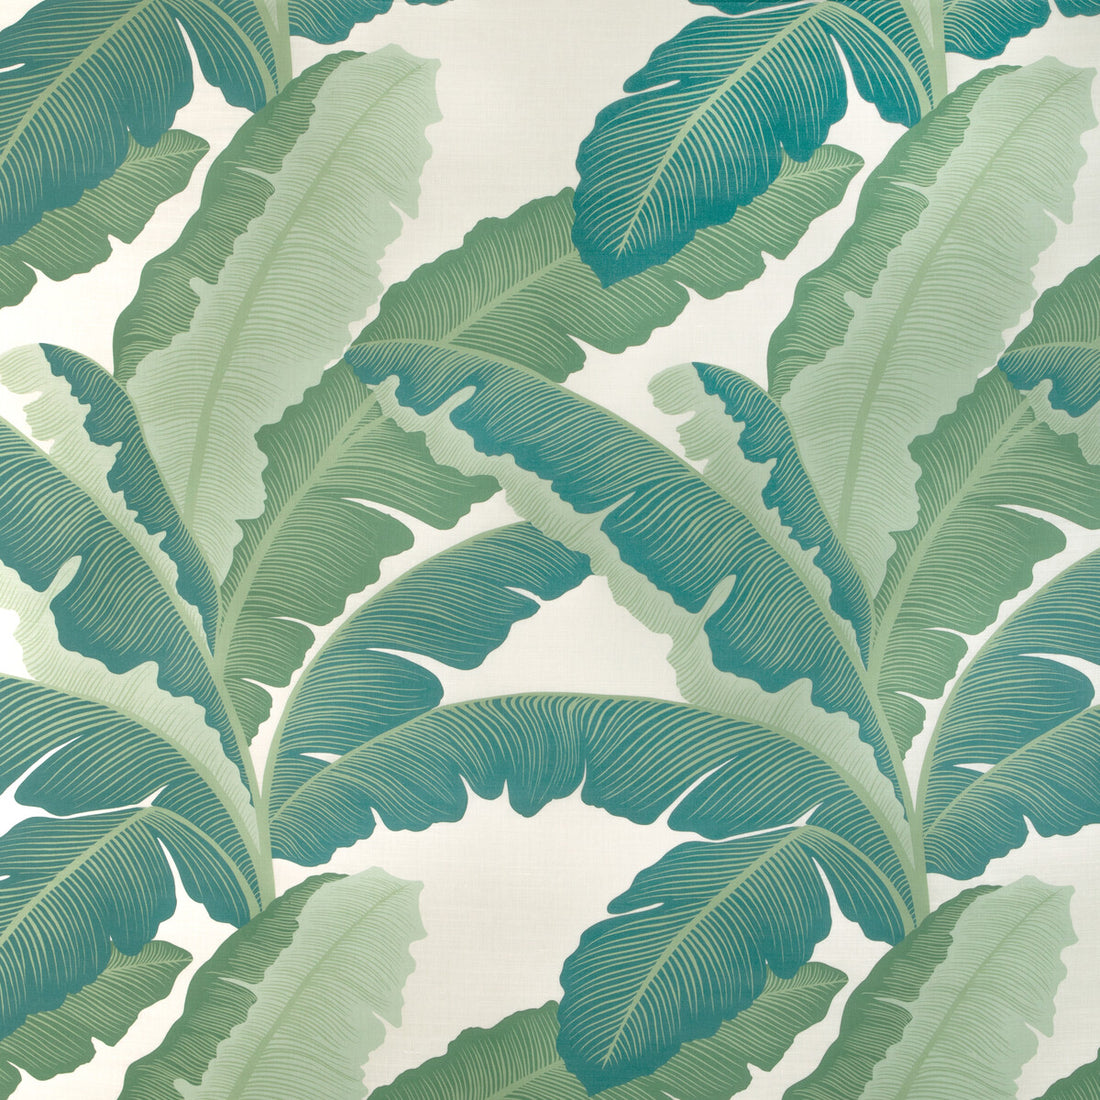 Isla Royal fabric in azure color - pattern ISLA ROYAL.5.0 - by Kravet Couture in the Casa Botanica collection